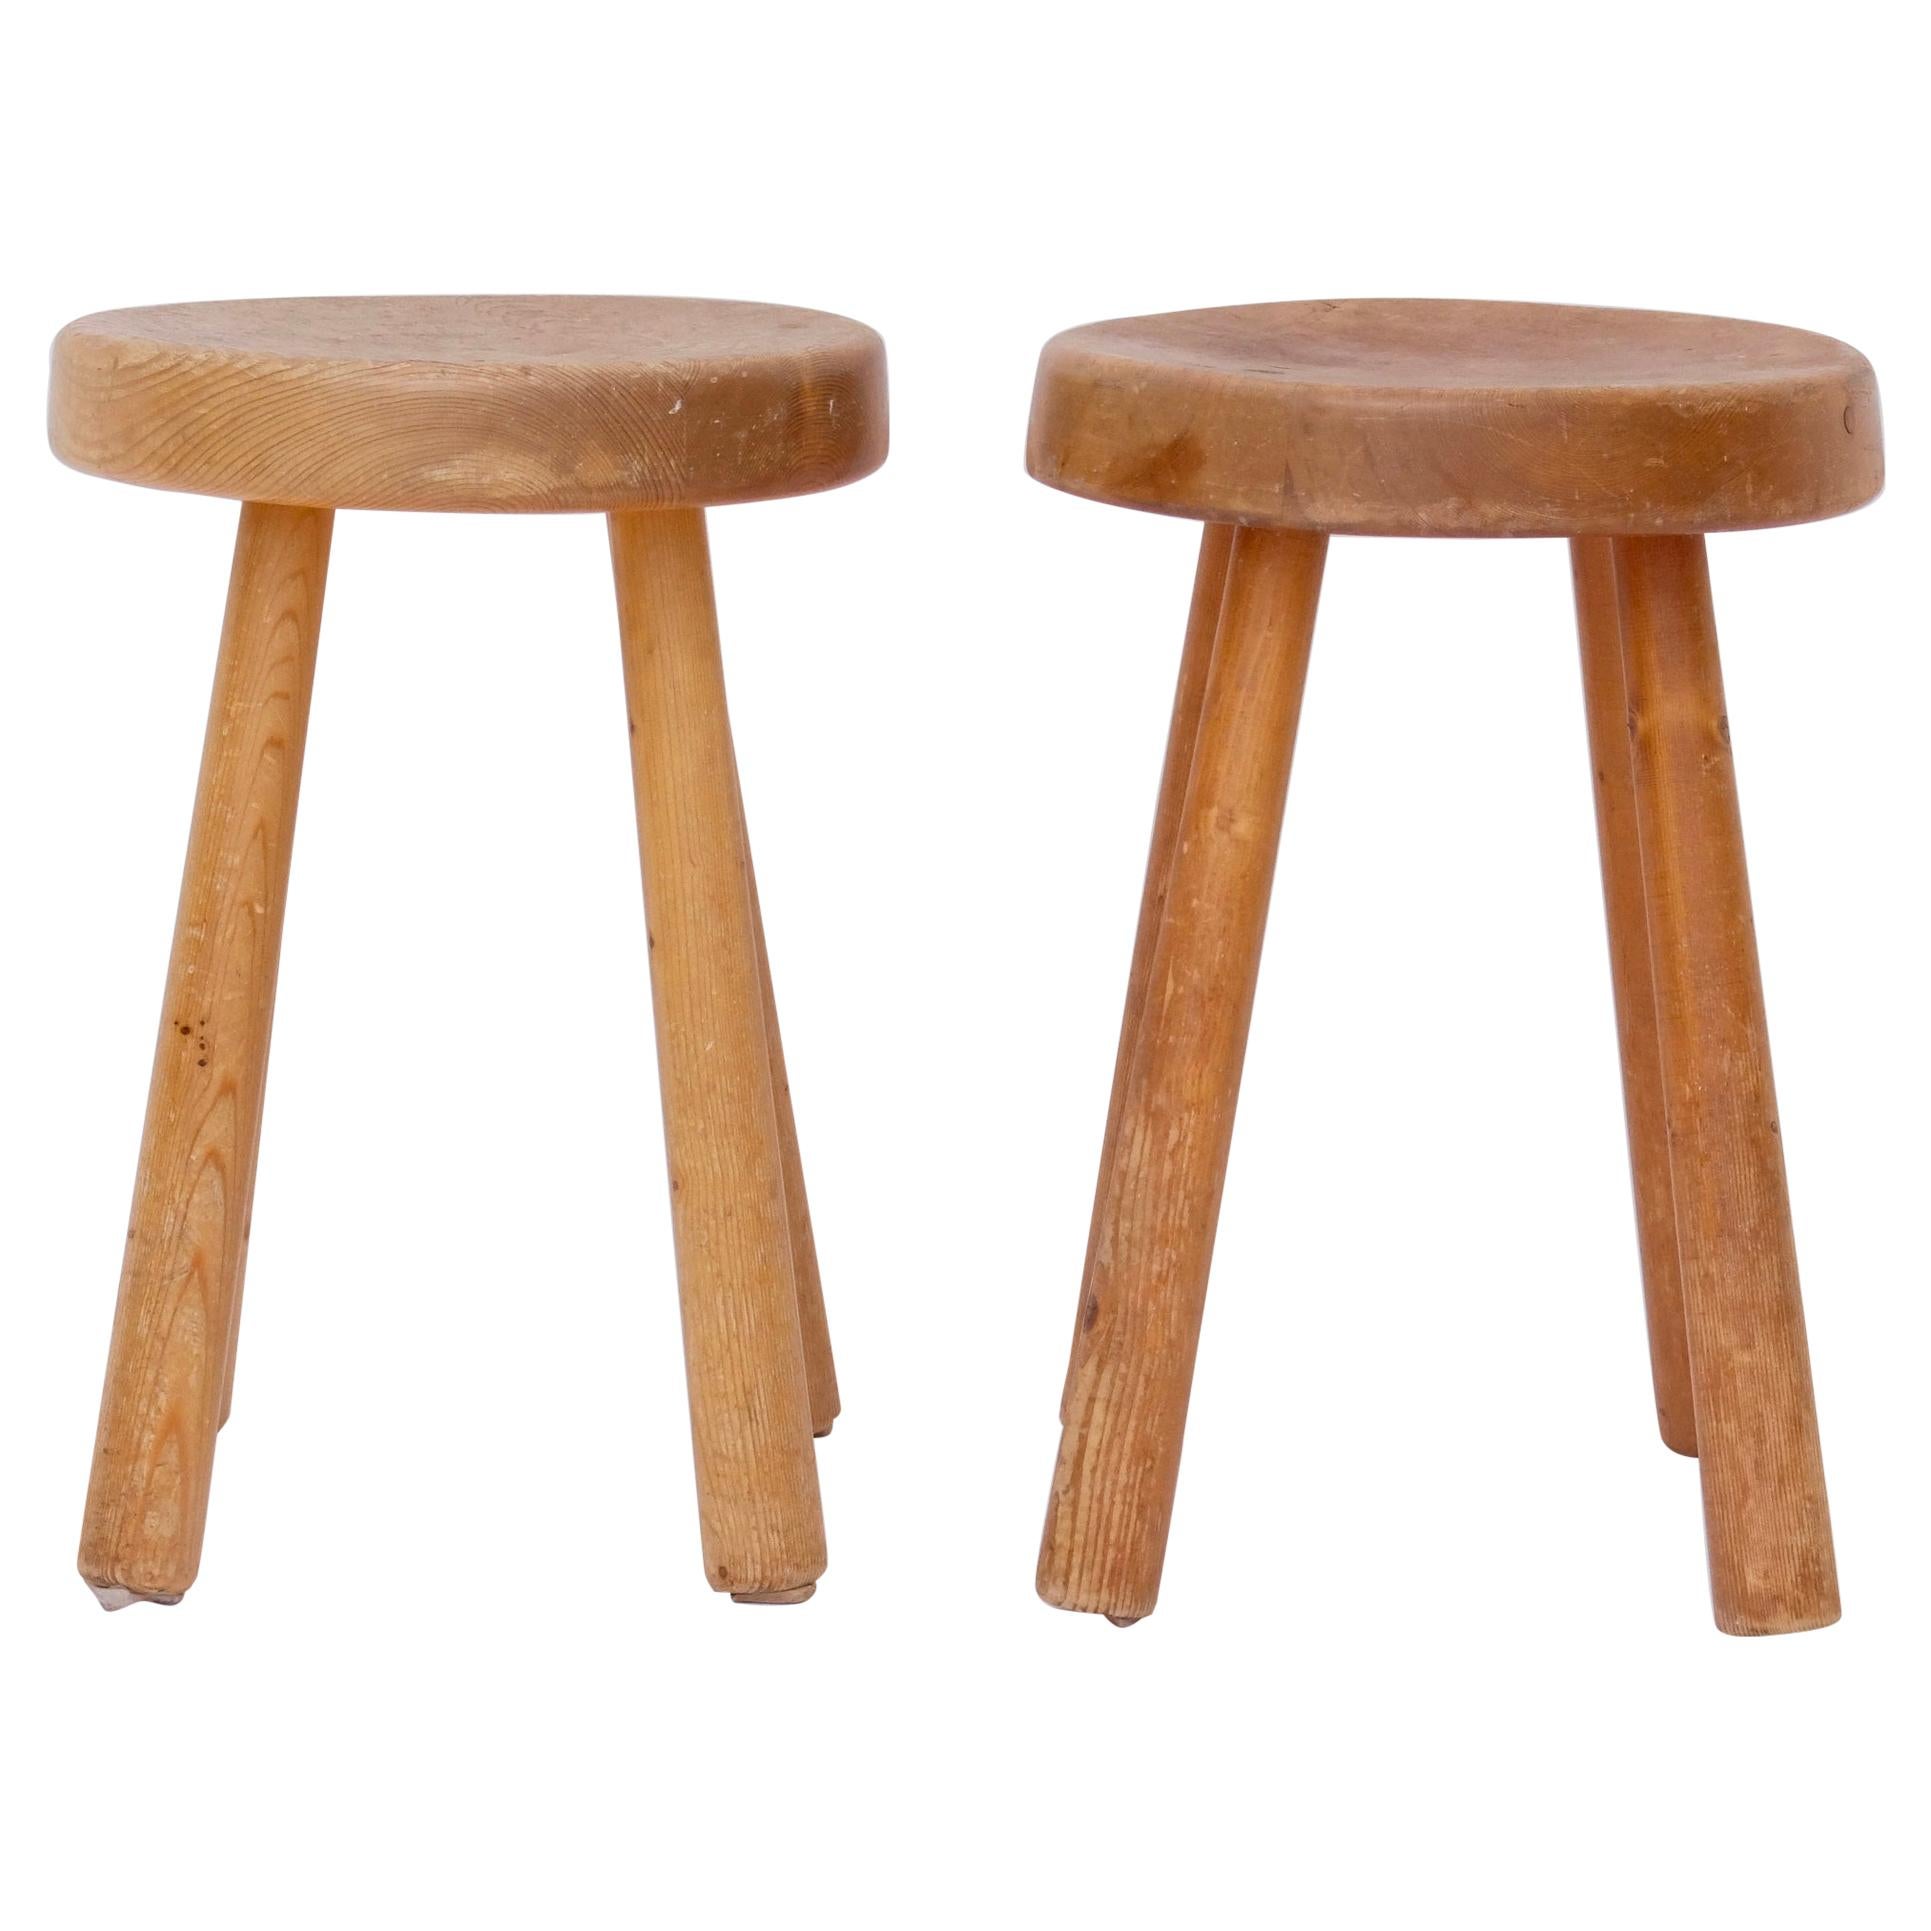 Very Rare Set of Charlotte Perriand 4 Legs Configuration Stools For Sale